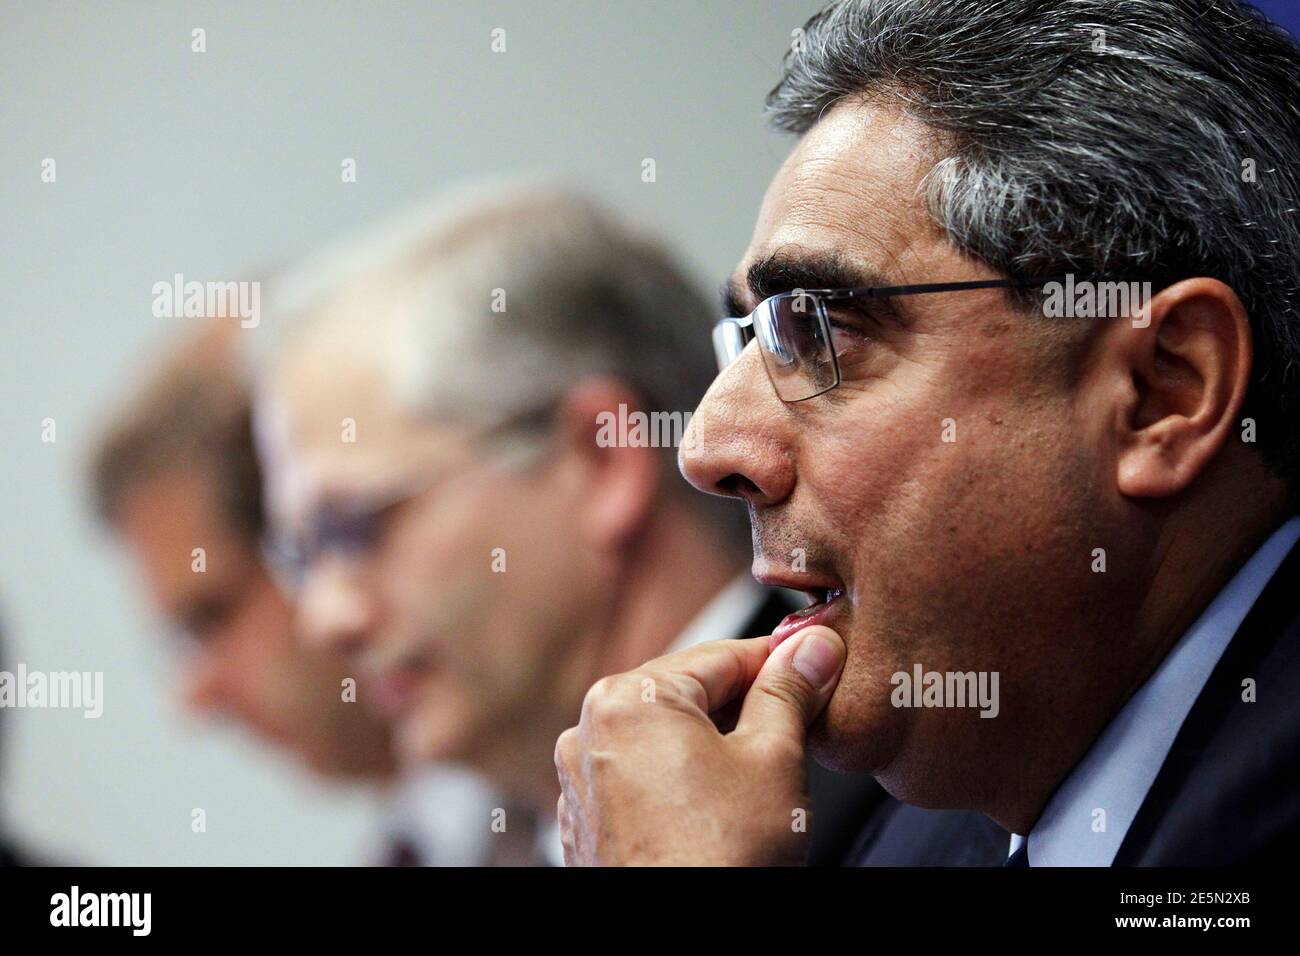 Deputy Director of the International Monetary Fund (IMF)'s European Department Ajai Chopra attends a joint news conference where the European Commission, ECB and IMF outlined Ireland's progress in meeting its targets as part of the EU/IMF bailout, in Dublin July 14, 2011. Rating agencies may be overestimating the risks associated with the current euro zone debt crisis and were it not for the contagion risk, Irish bond spreads would be narrower, a senior IMF official said on Thursday. REUTERS/Cathal McNaughton (IRELAND - Tags: POLITICS BUSINESS) Stock Photo